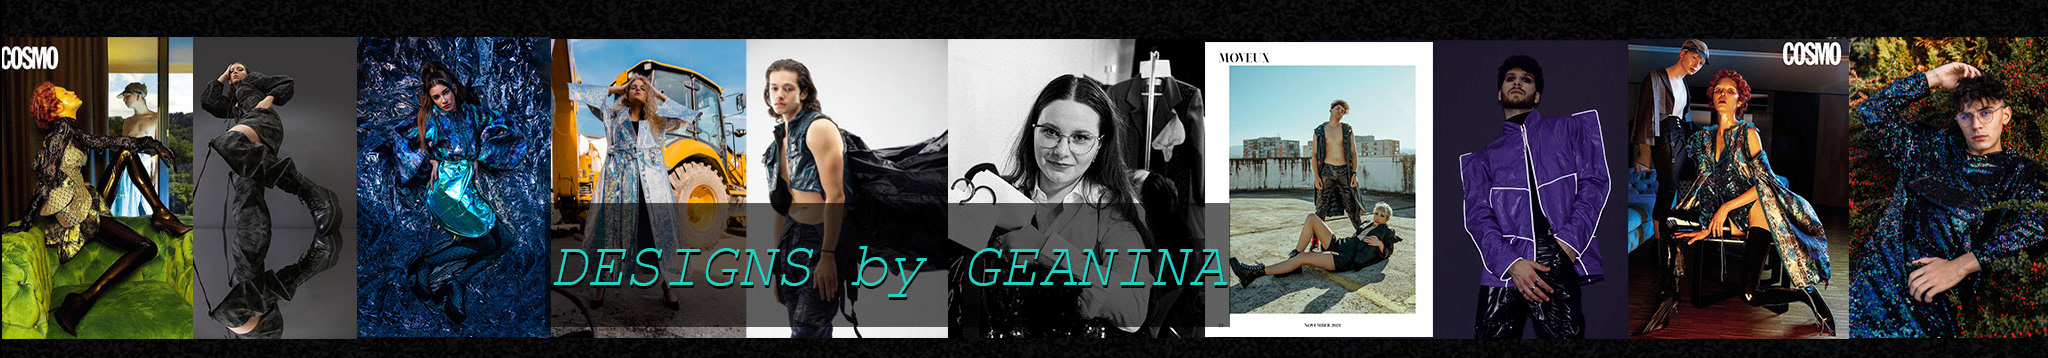 Designs by Geanina's profile banner